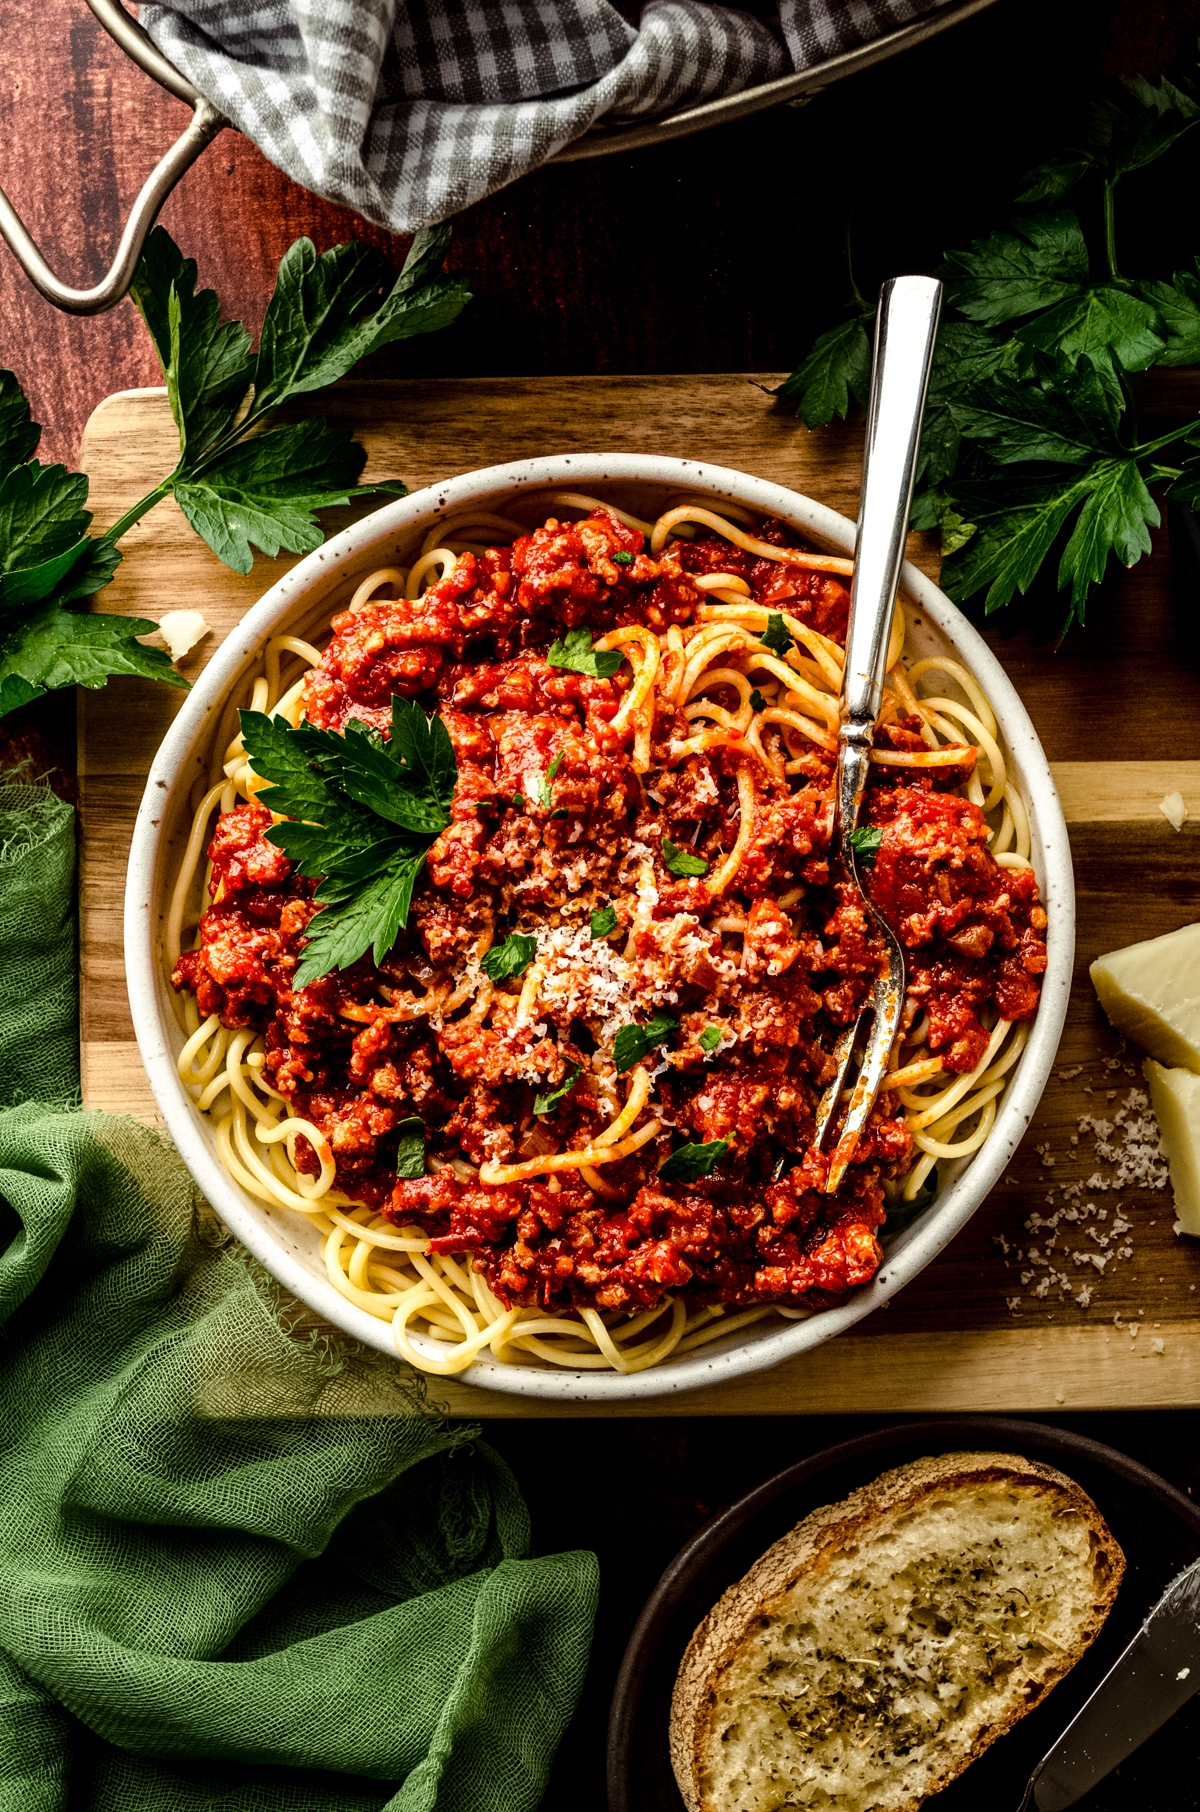 Aerial photo of a bowl of pasta with homemade meat sauce on it. There is a fork in the bowl and the plate is garnished with parsley and grated cheese.